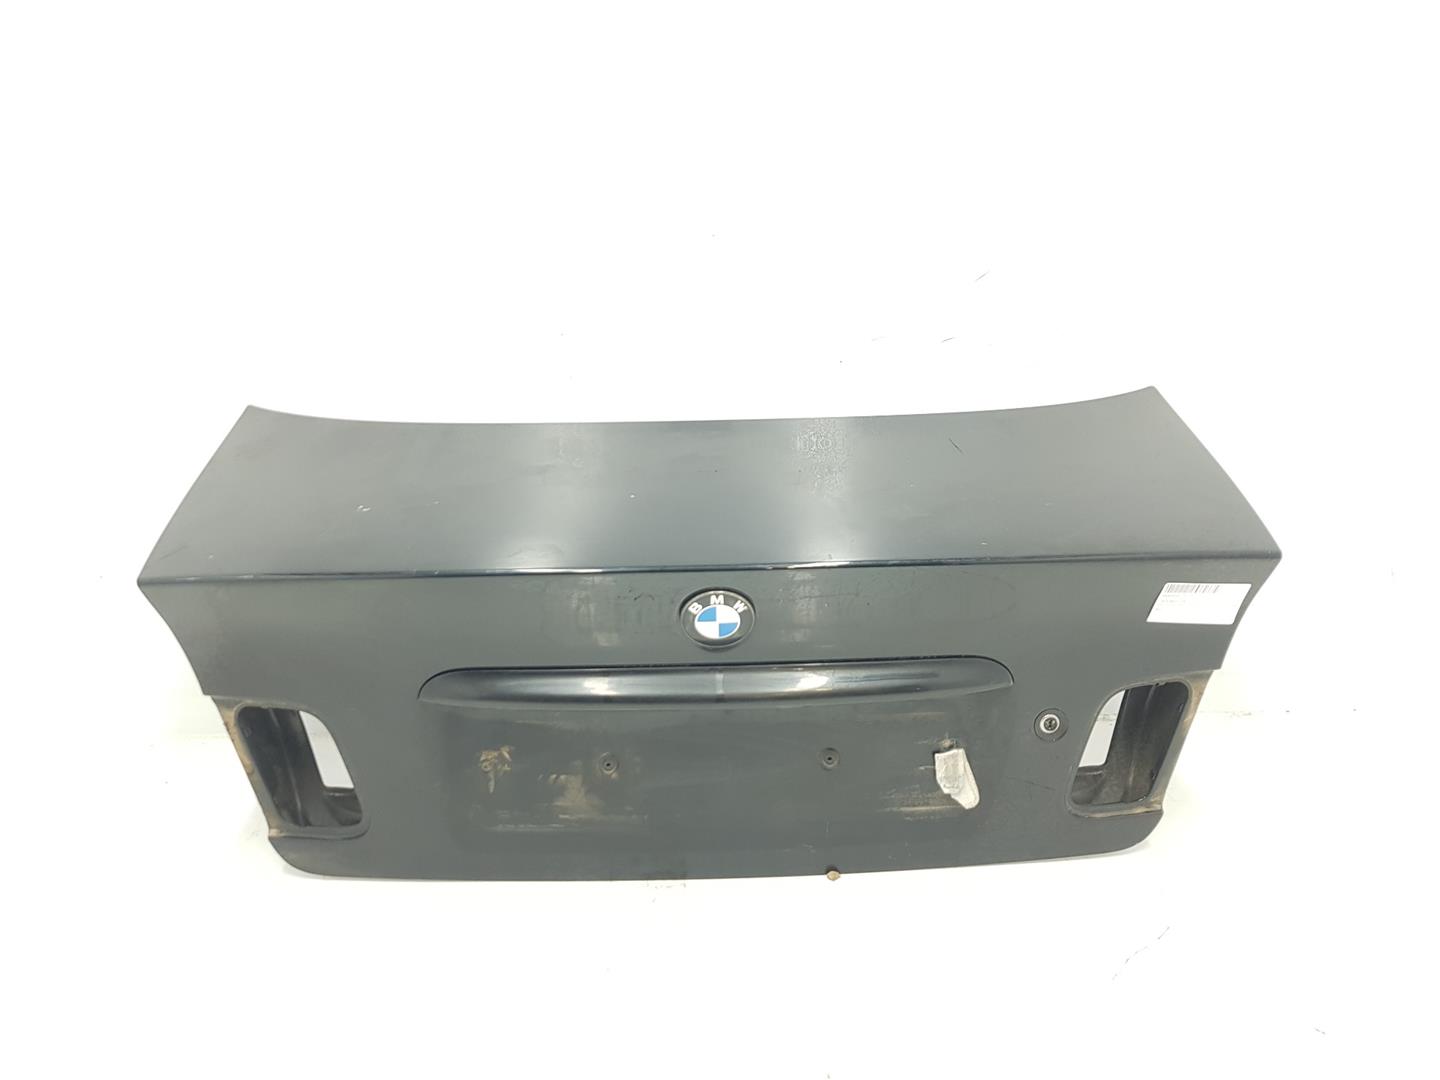 BMW 3 Series E46 (1997-2006) Bootlid Rear Boot 41627003314, 41627003314, COLORNEGRO475 19849658